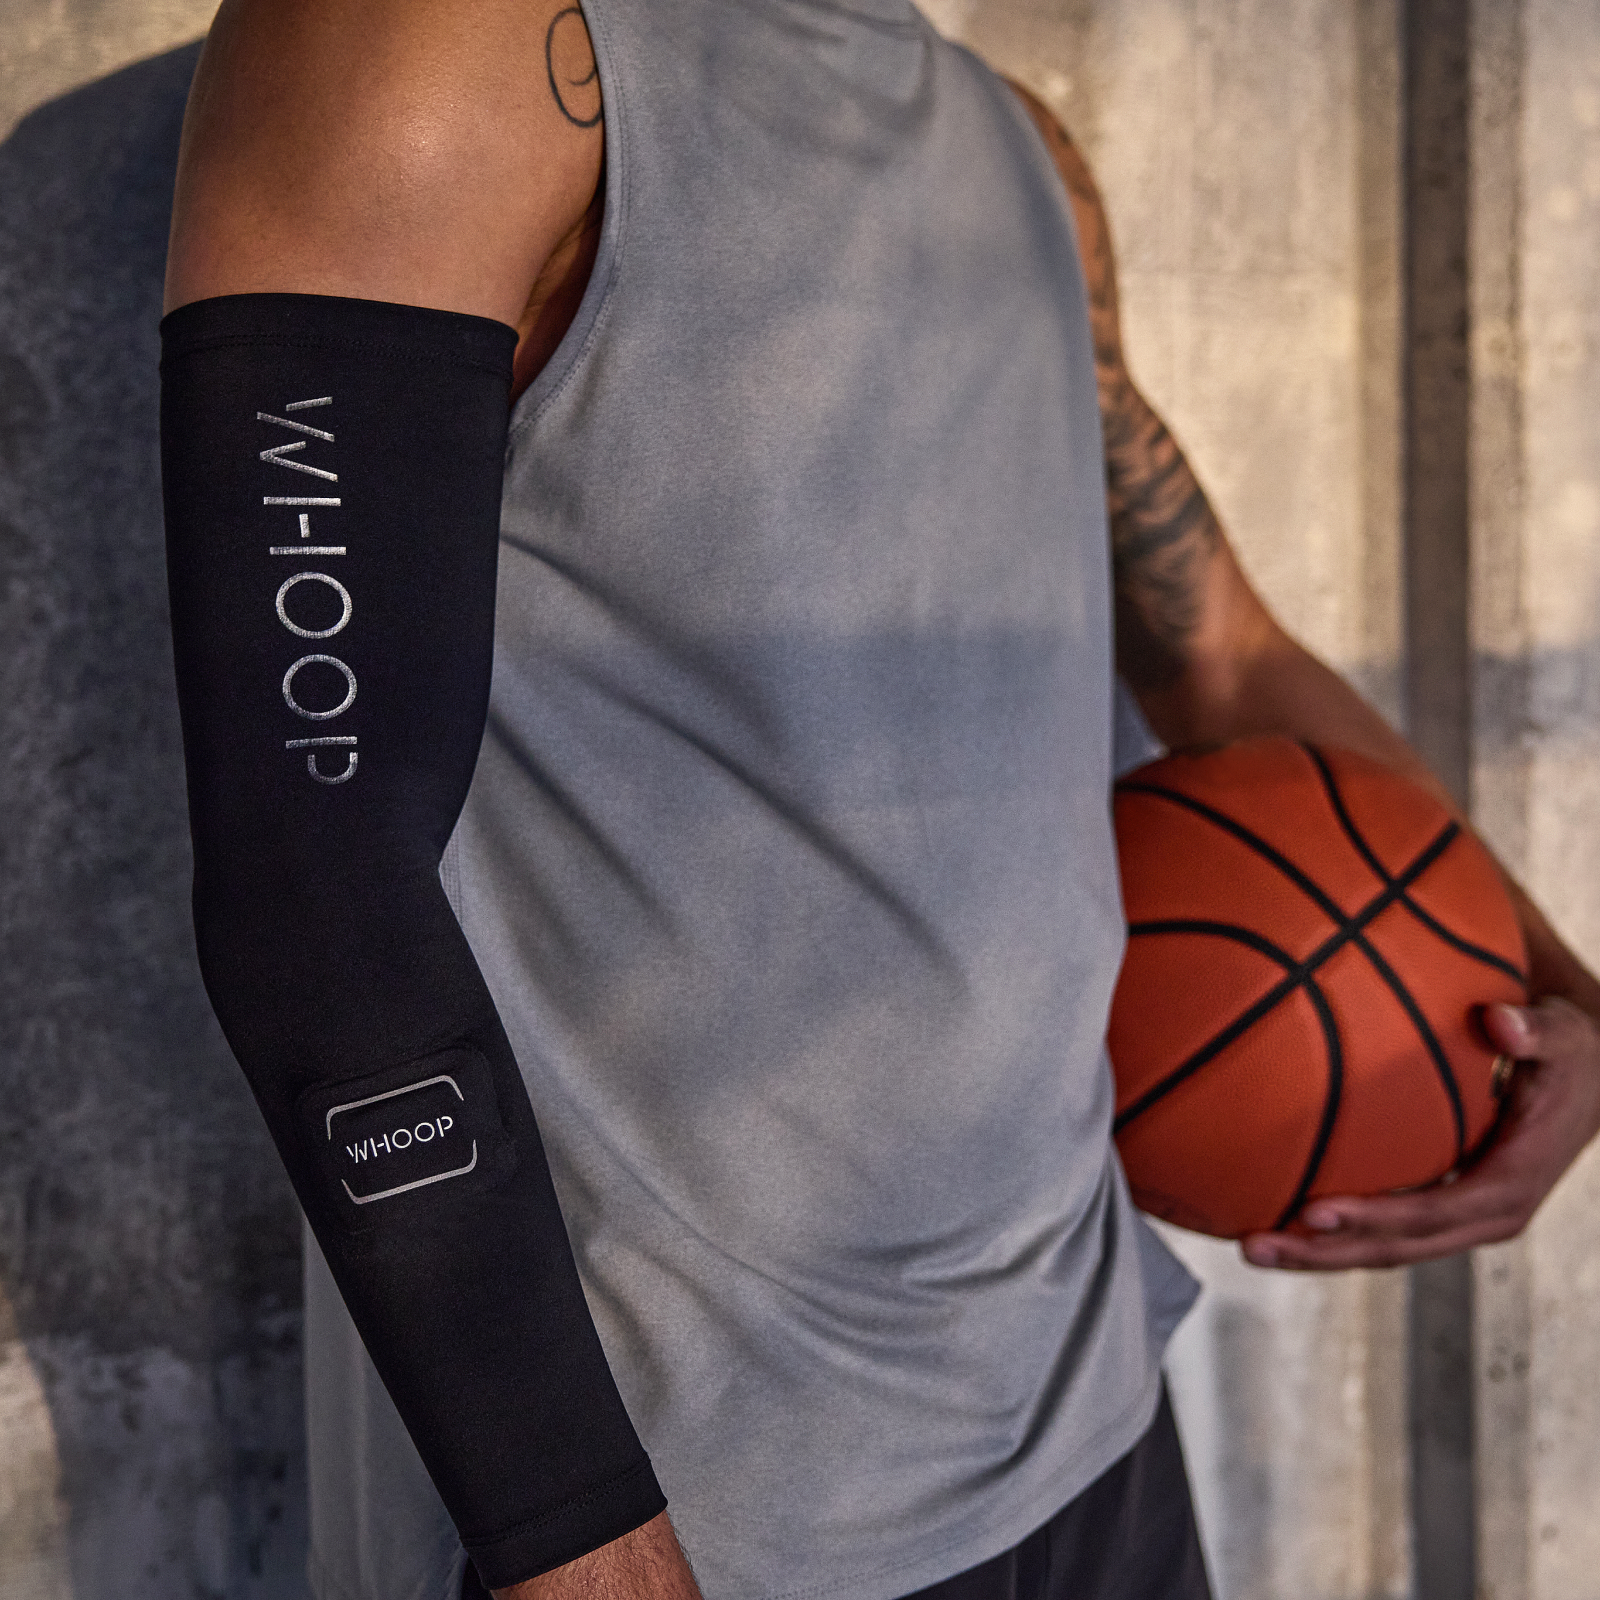 ANY-WEAR™ Arm Sleeve  WHOOP - The World's Most Powerful Fitness Membership